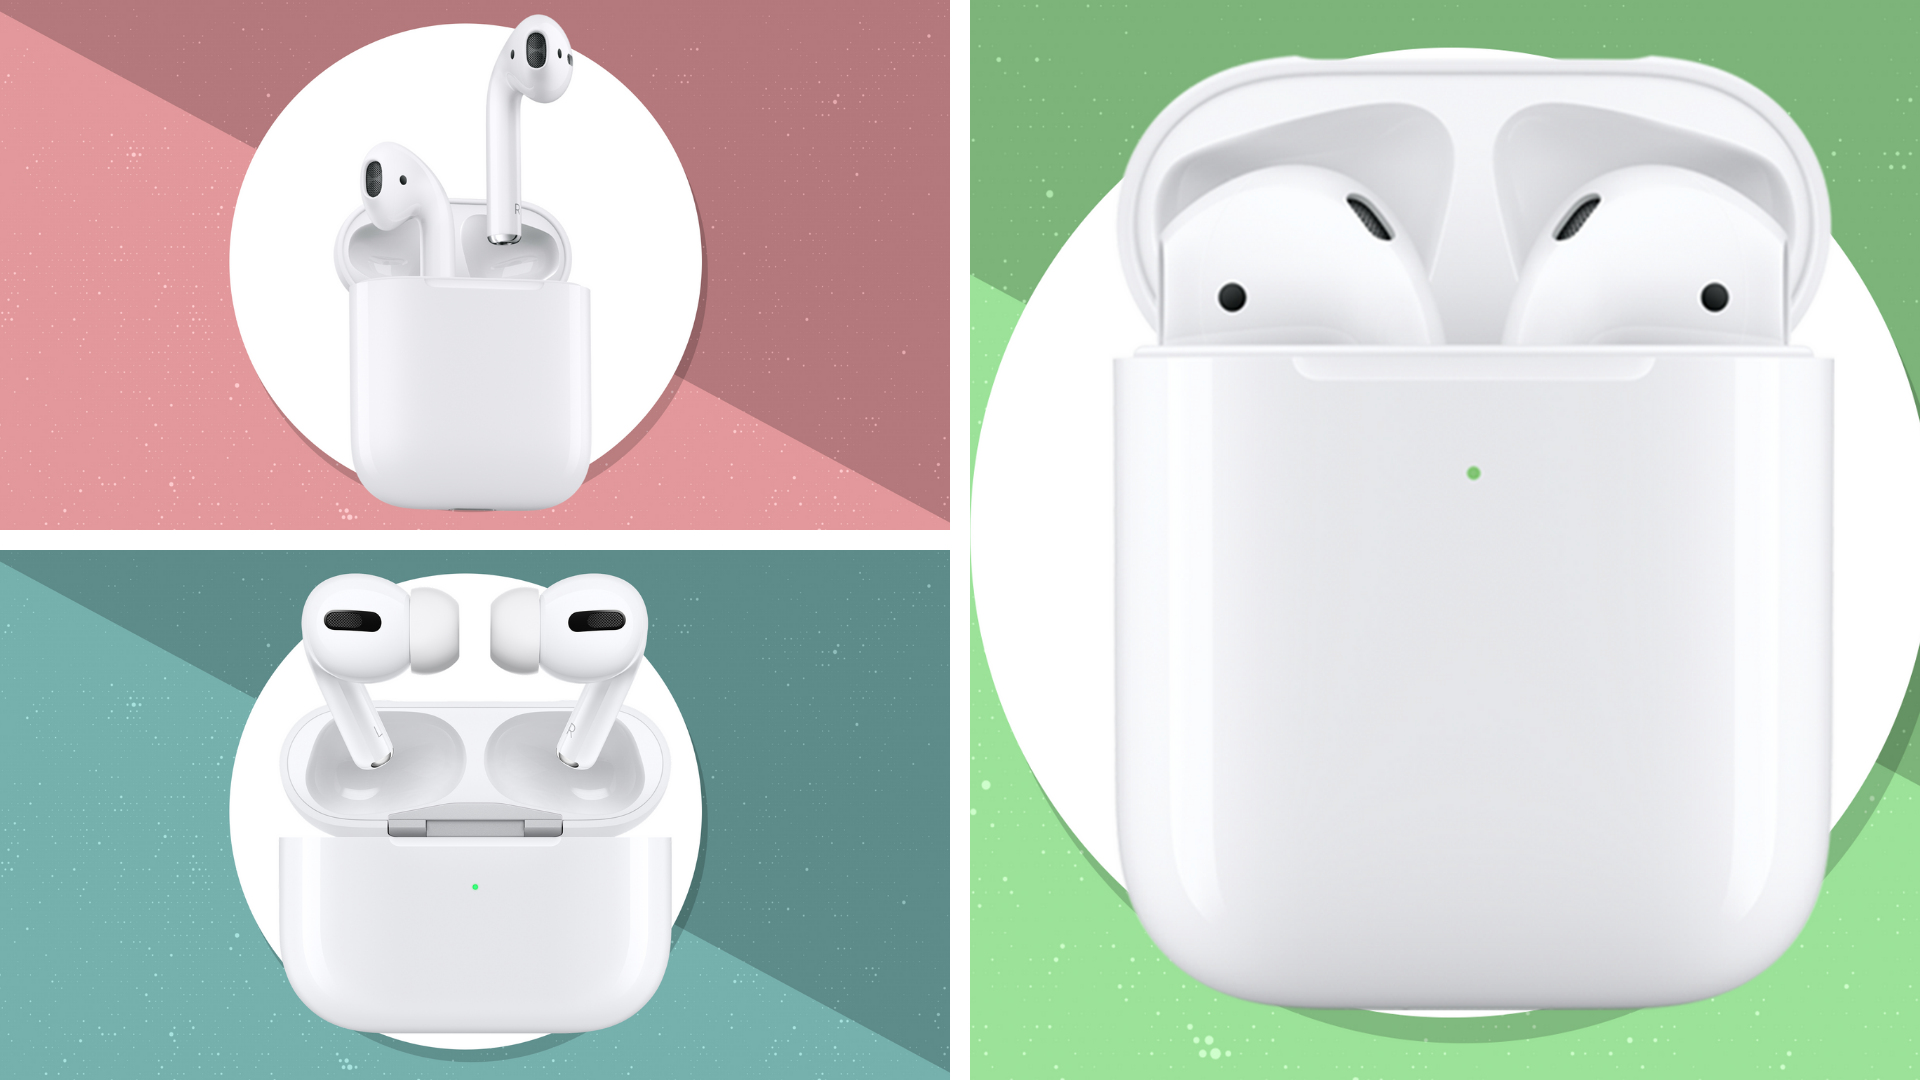 Apple Airpods and AirPods Pro are on sale at Amazon and Verizon